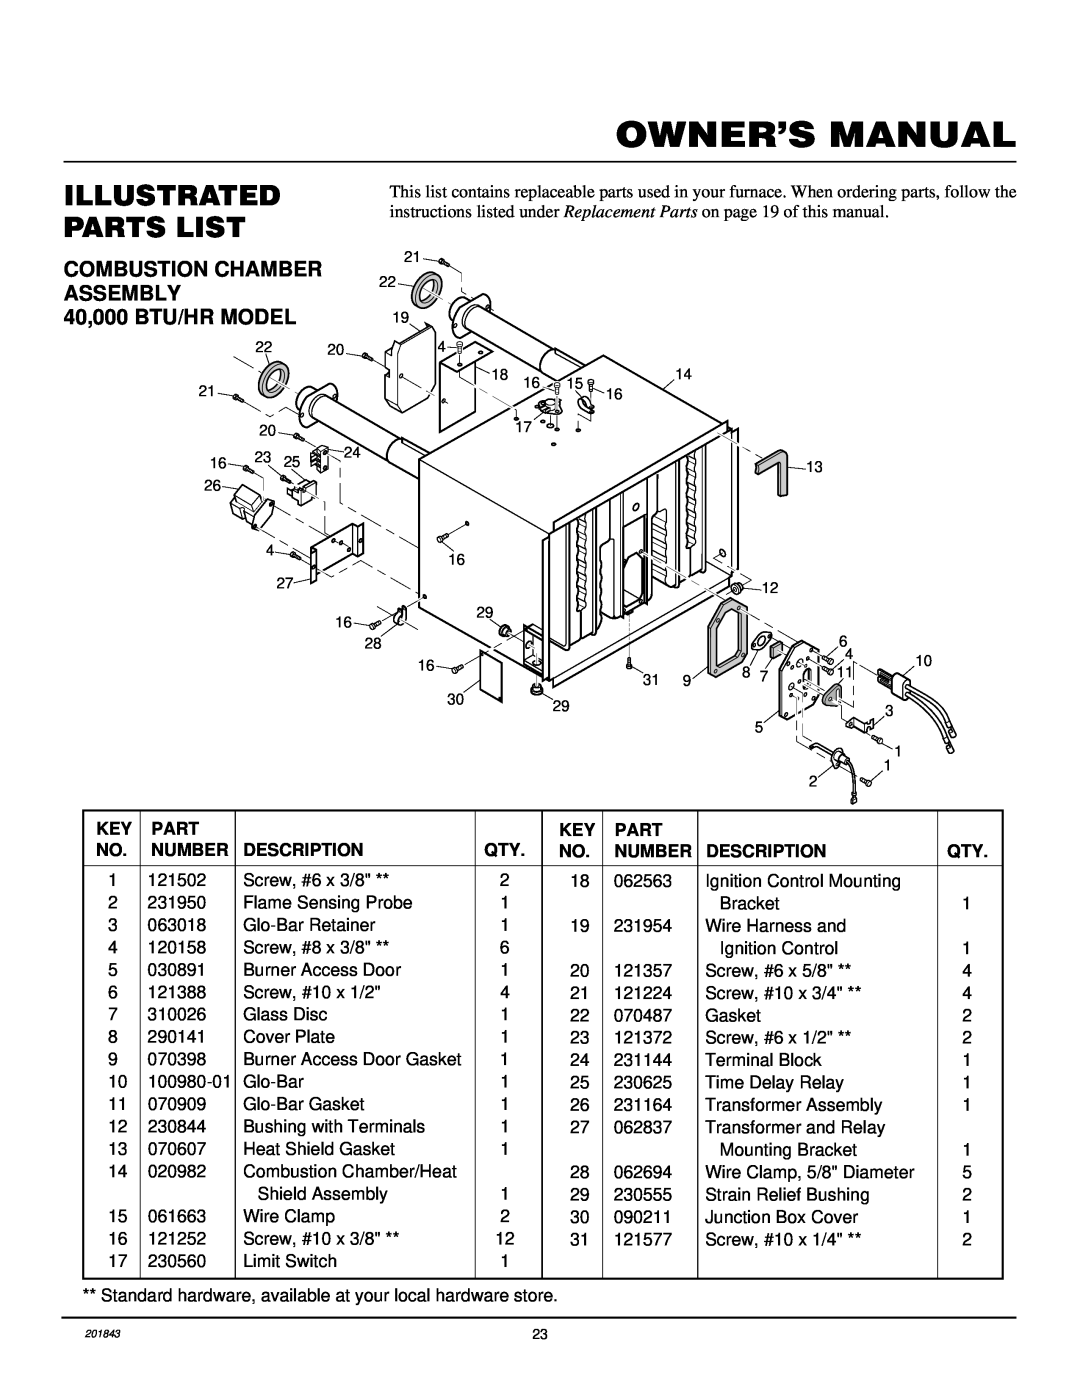 Williams 4003531, 2503531 installation manual Illustrated Parts List, Combustion Chamber, Assembly, 40,000 BTU/HR MODEL 